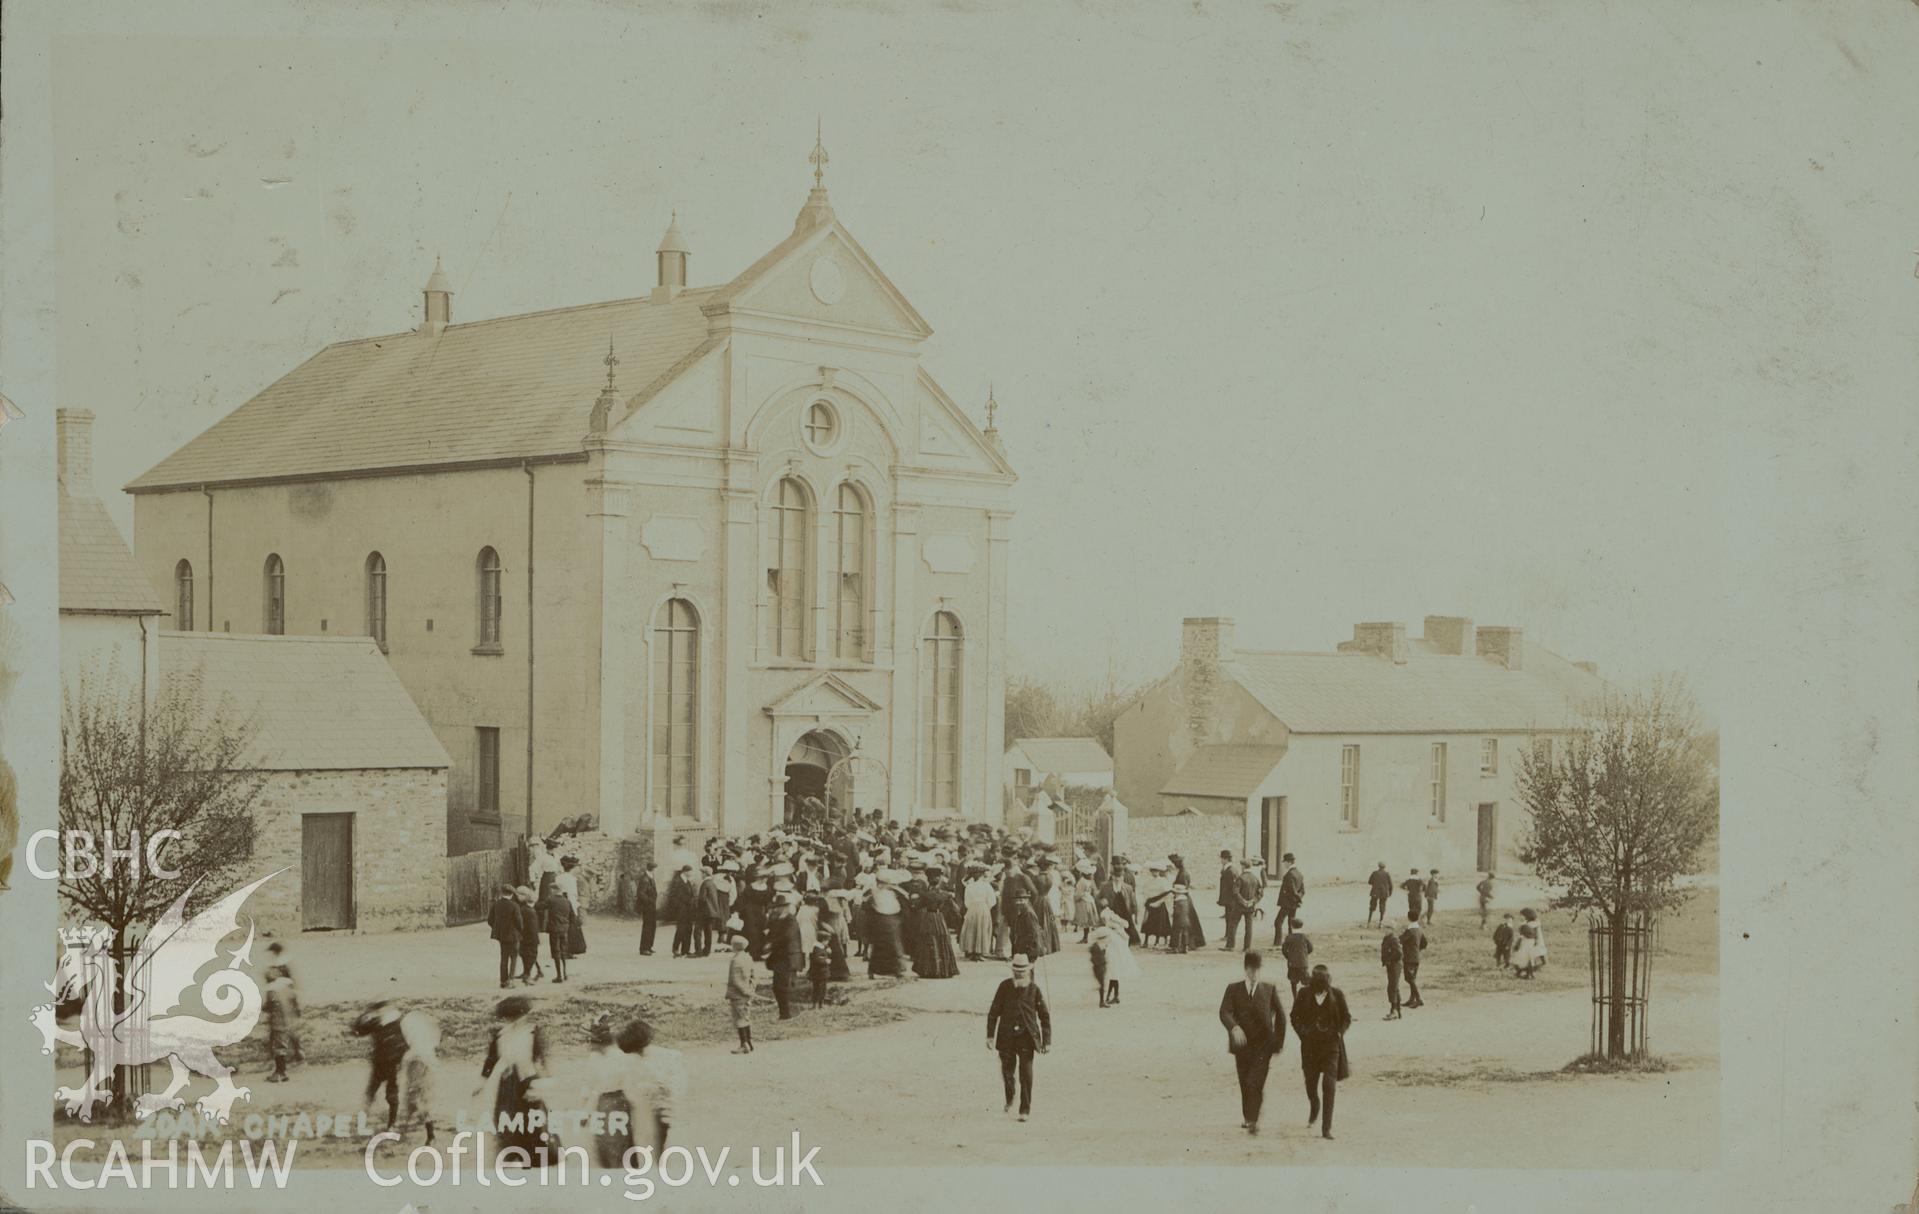 Digital copy of monochrome postcard showing exterior view of Soar Welsh Independent chapel, Y Commins, Lampeter. Postcard produced by D. J. Davies, The Studio, Lampeter. Franked on 31st May 1910 at 2:30 pm. Loaned for copying by Thomas Lloyd.